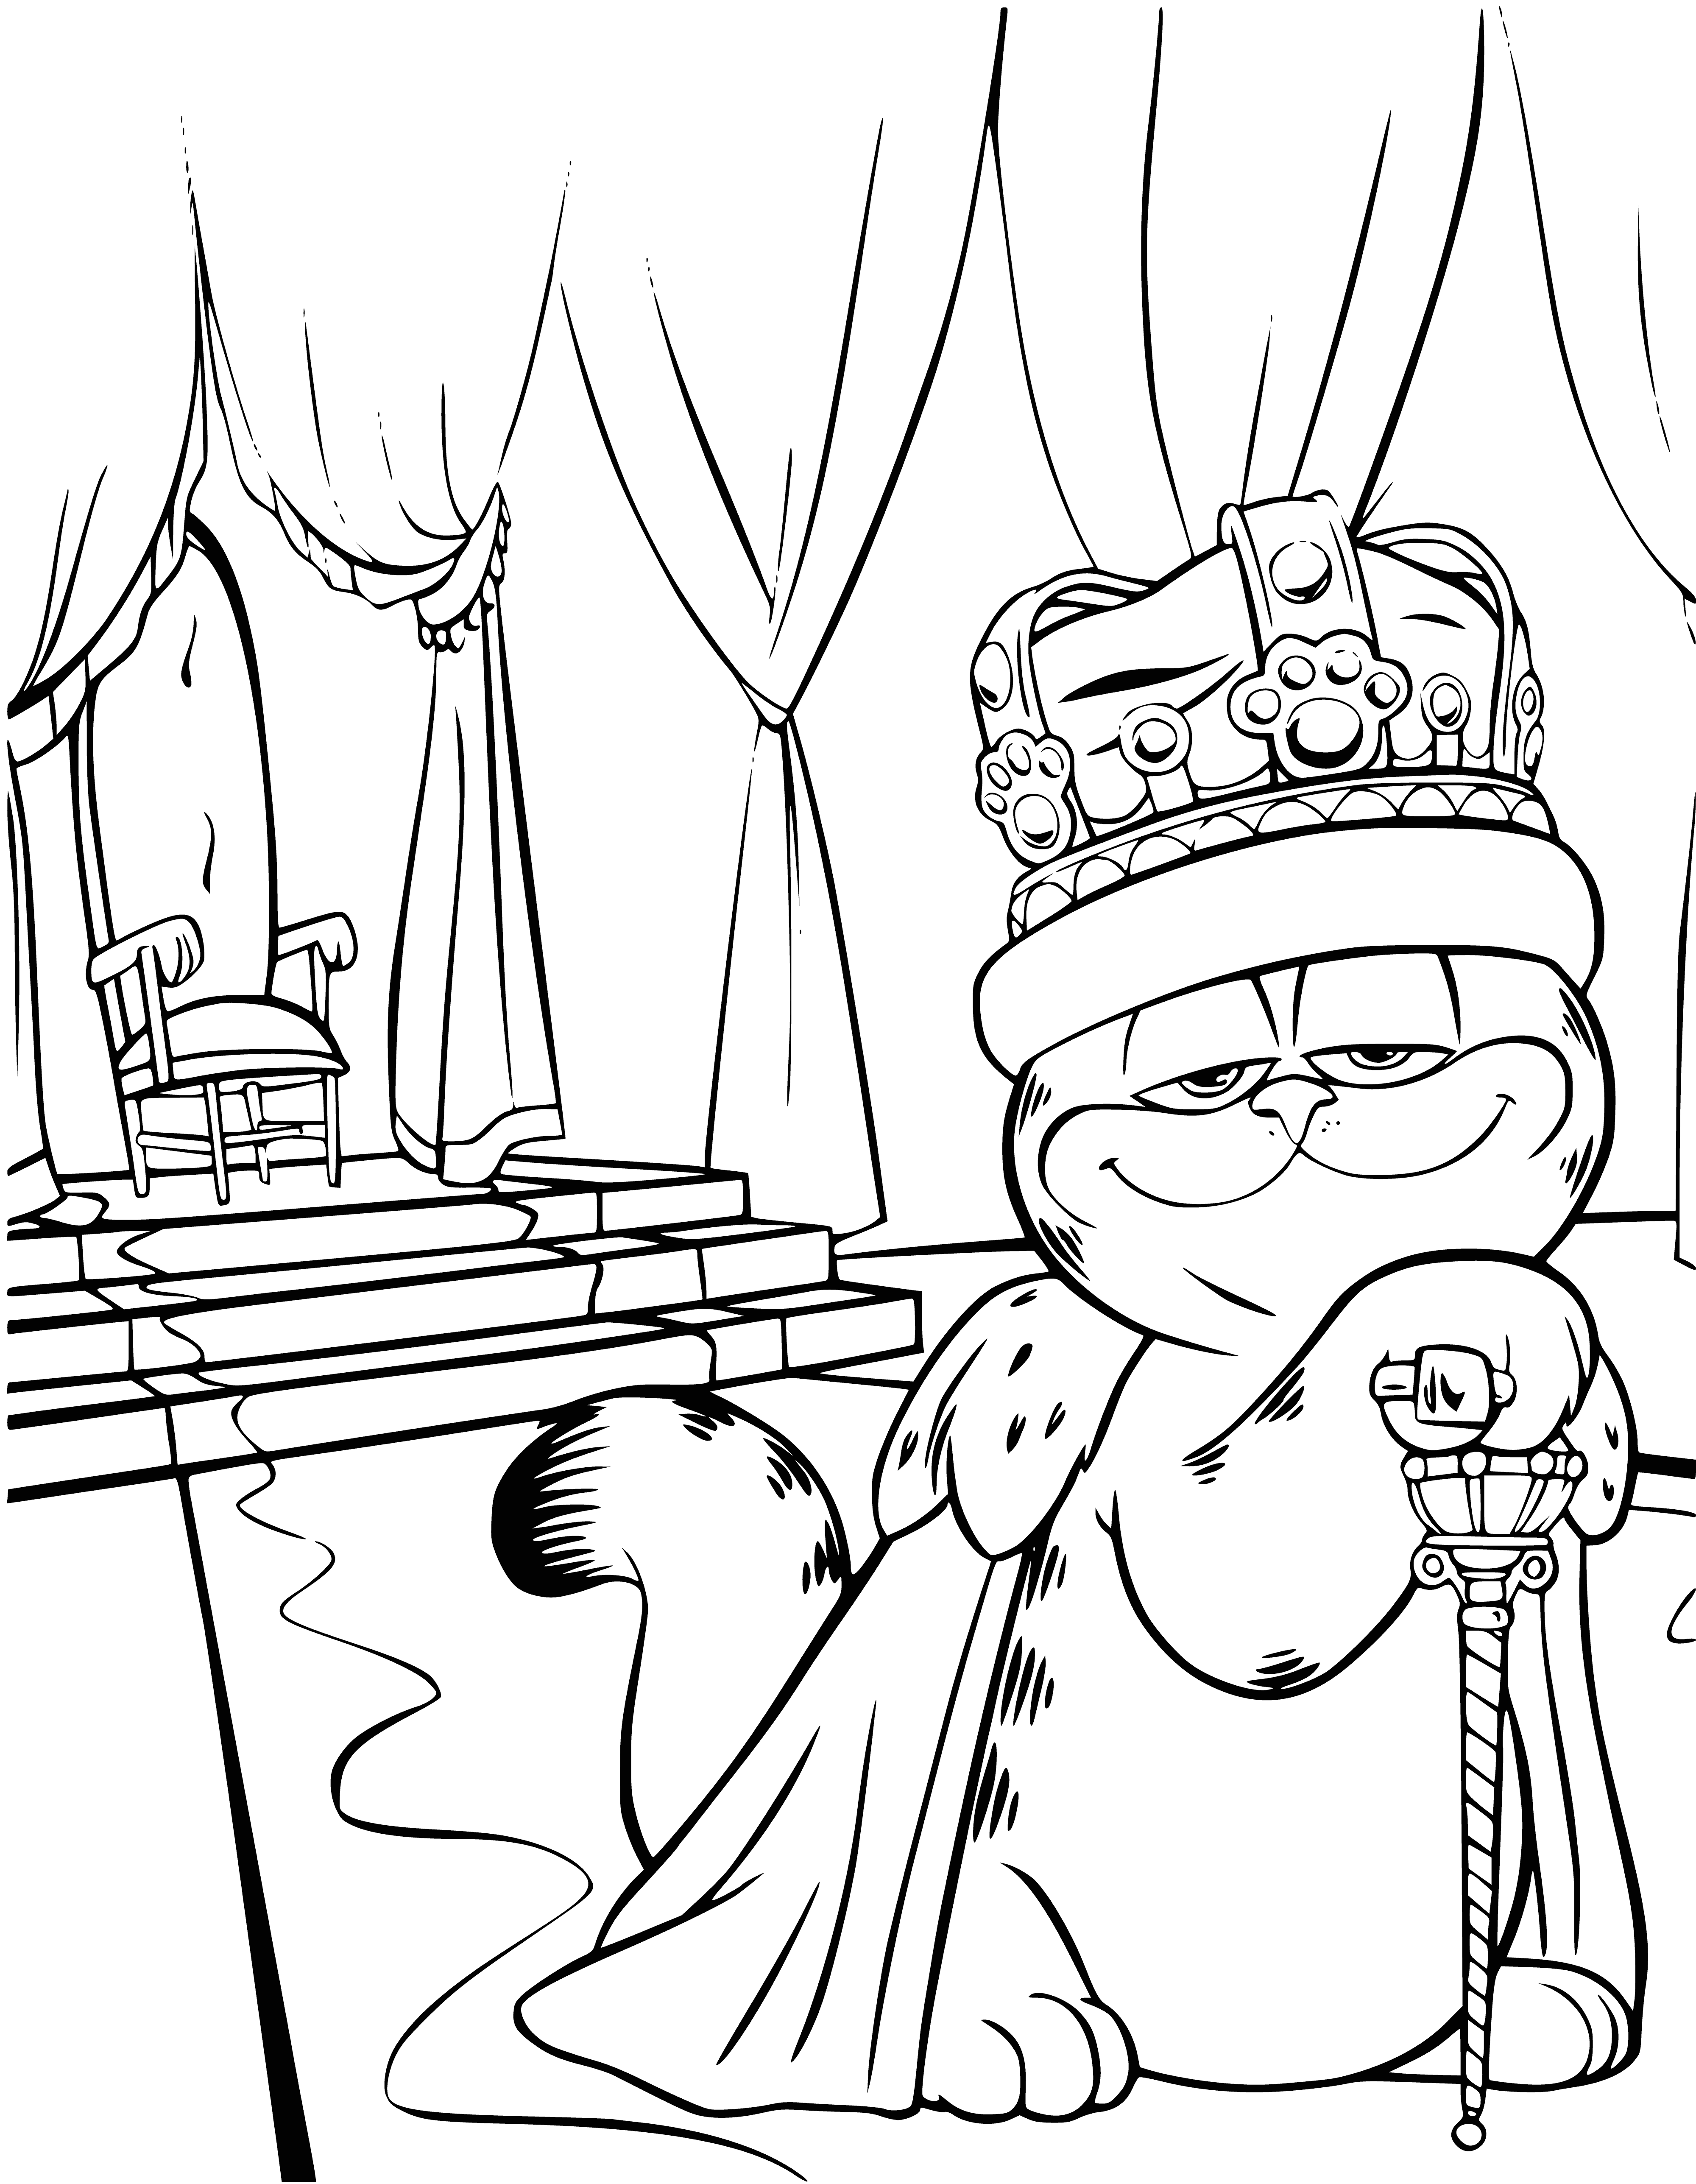 Royal person coloring page